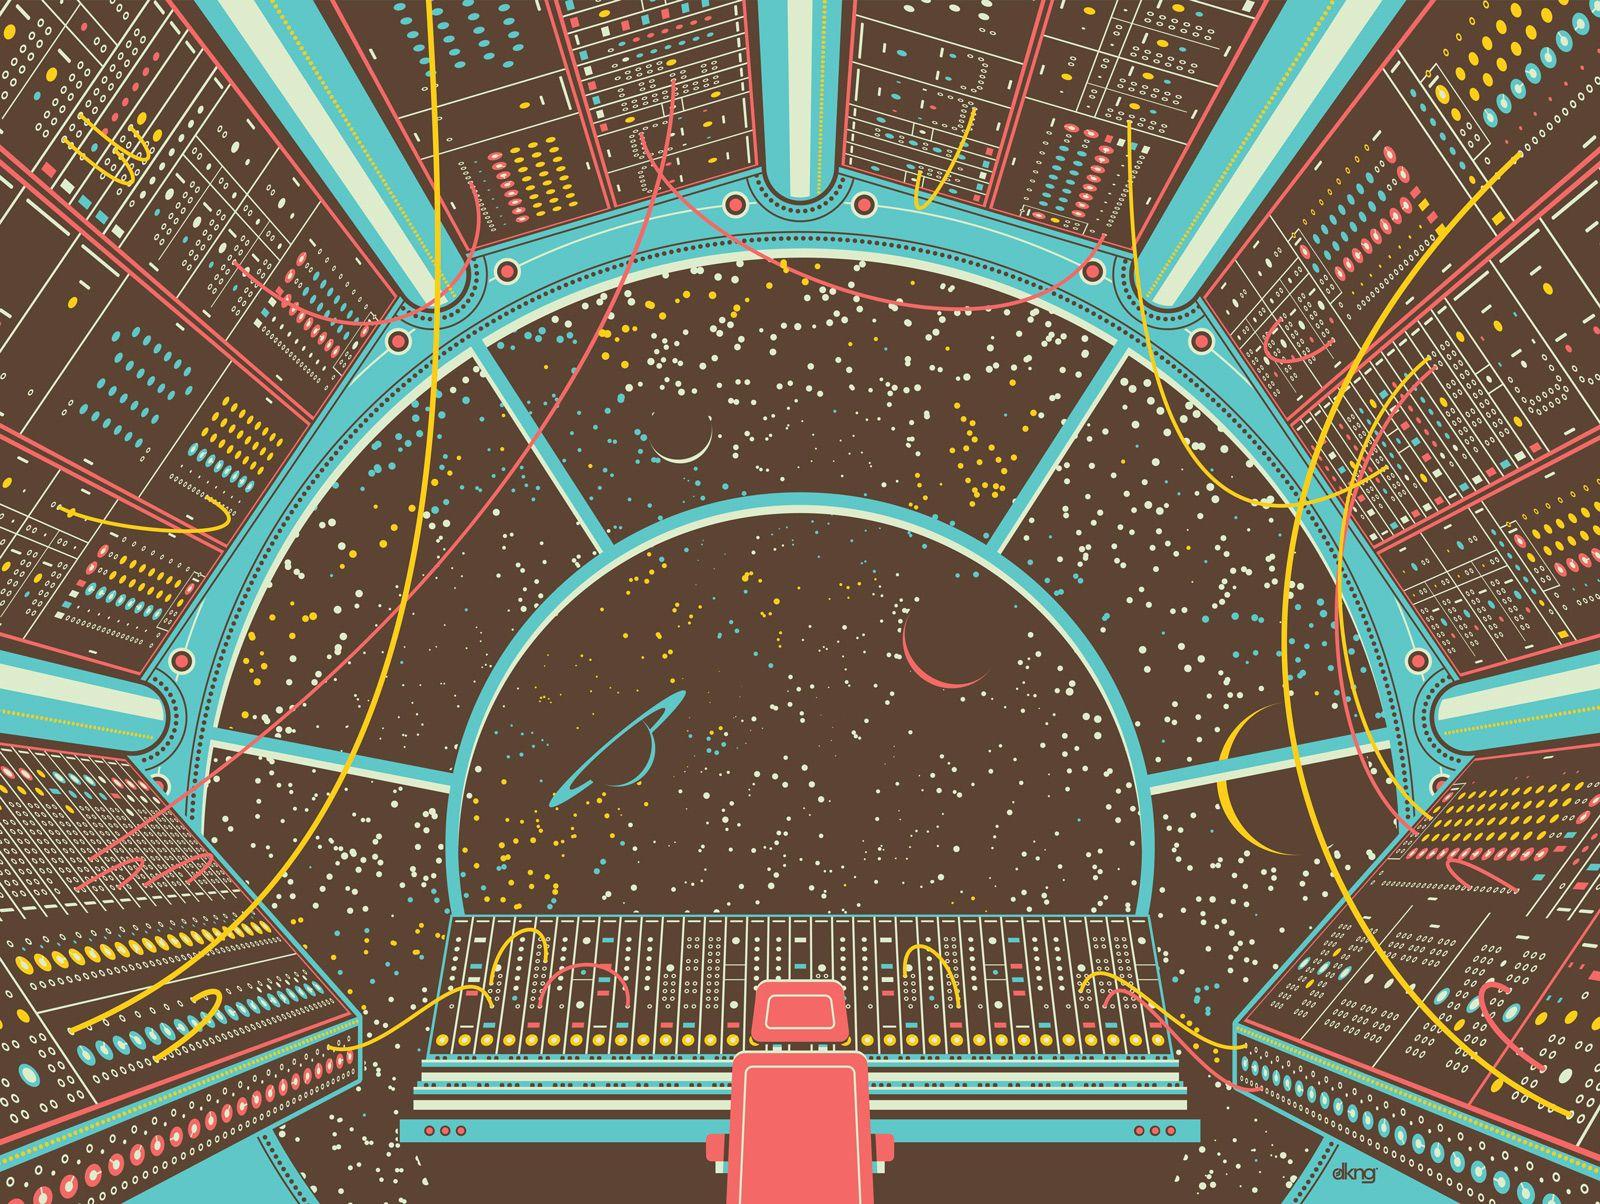 Moog Inspired Art Goes Galactic. Space Age Architecture